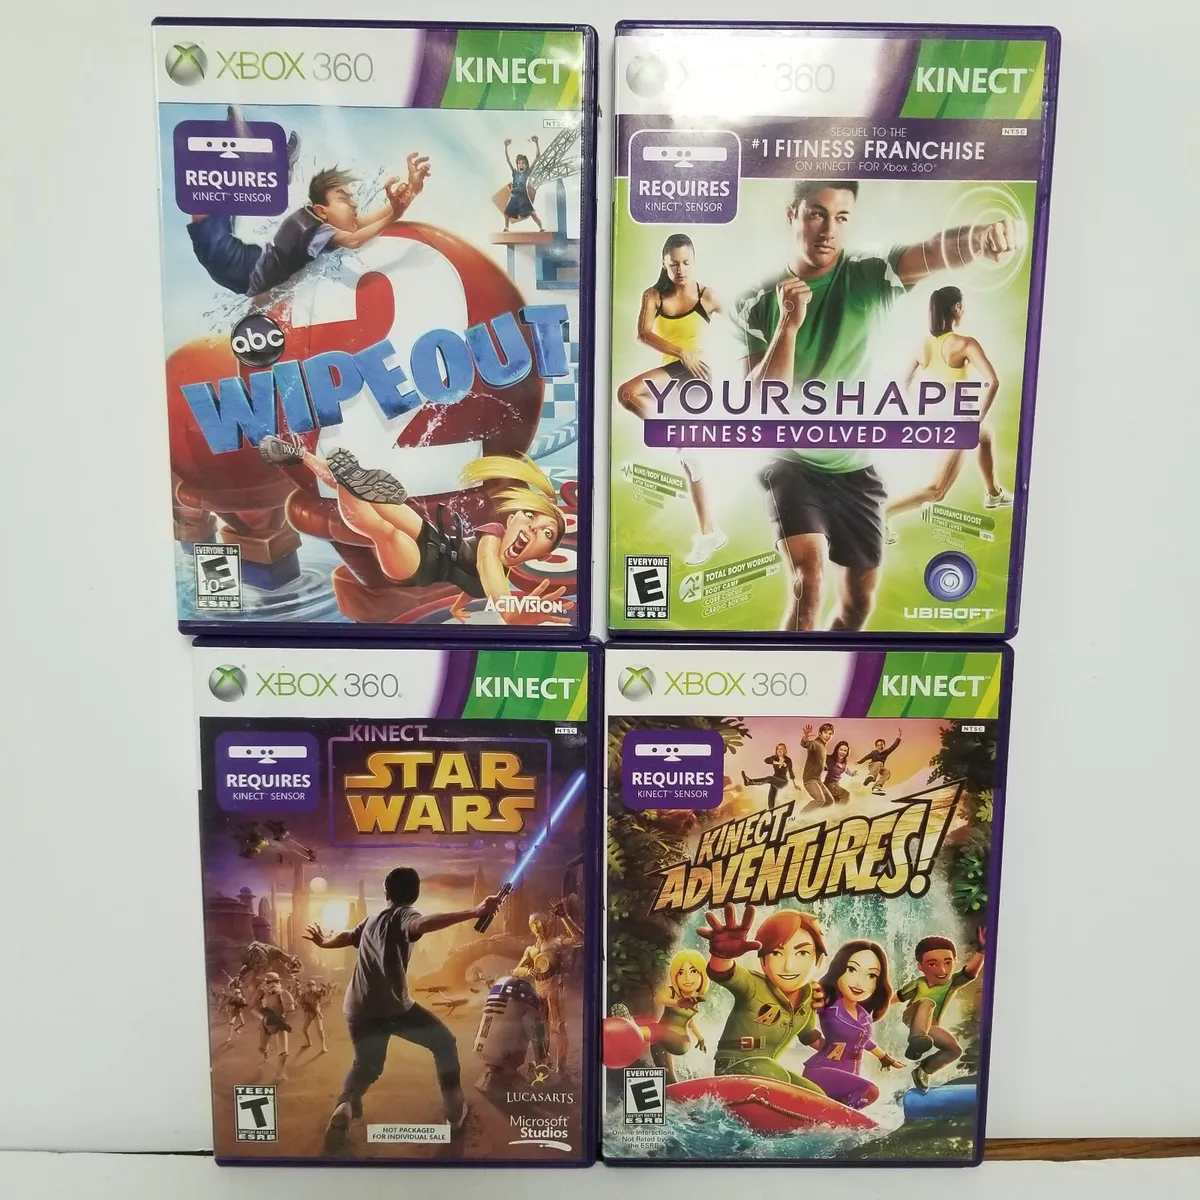 Kinect Star Wars - Xbox 360 - Game Games - Loja de Games Online